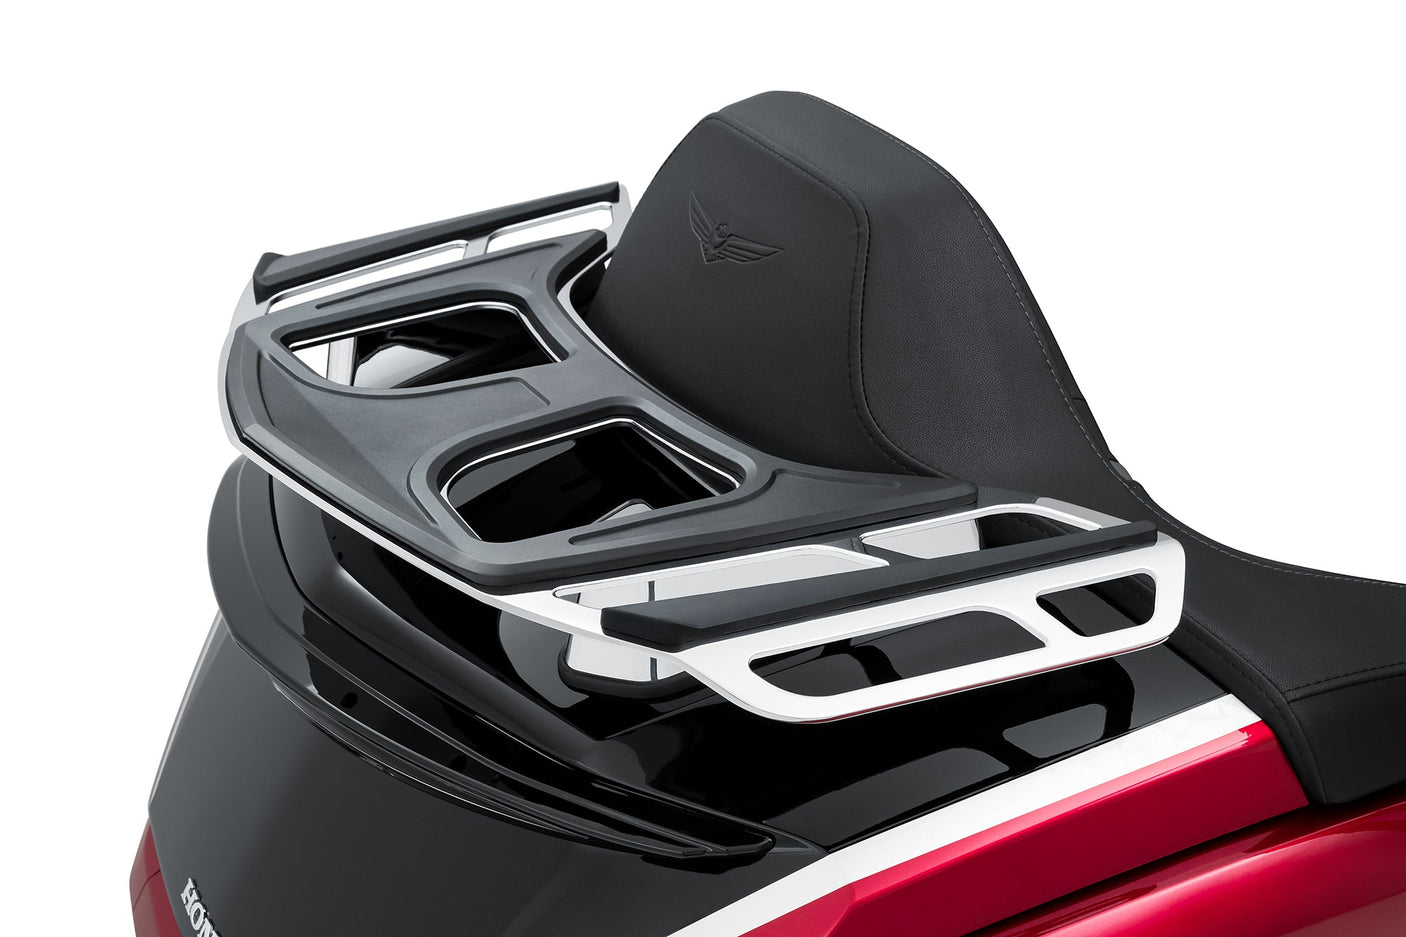 Goldstrike Luggage Rack for Gold Wing